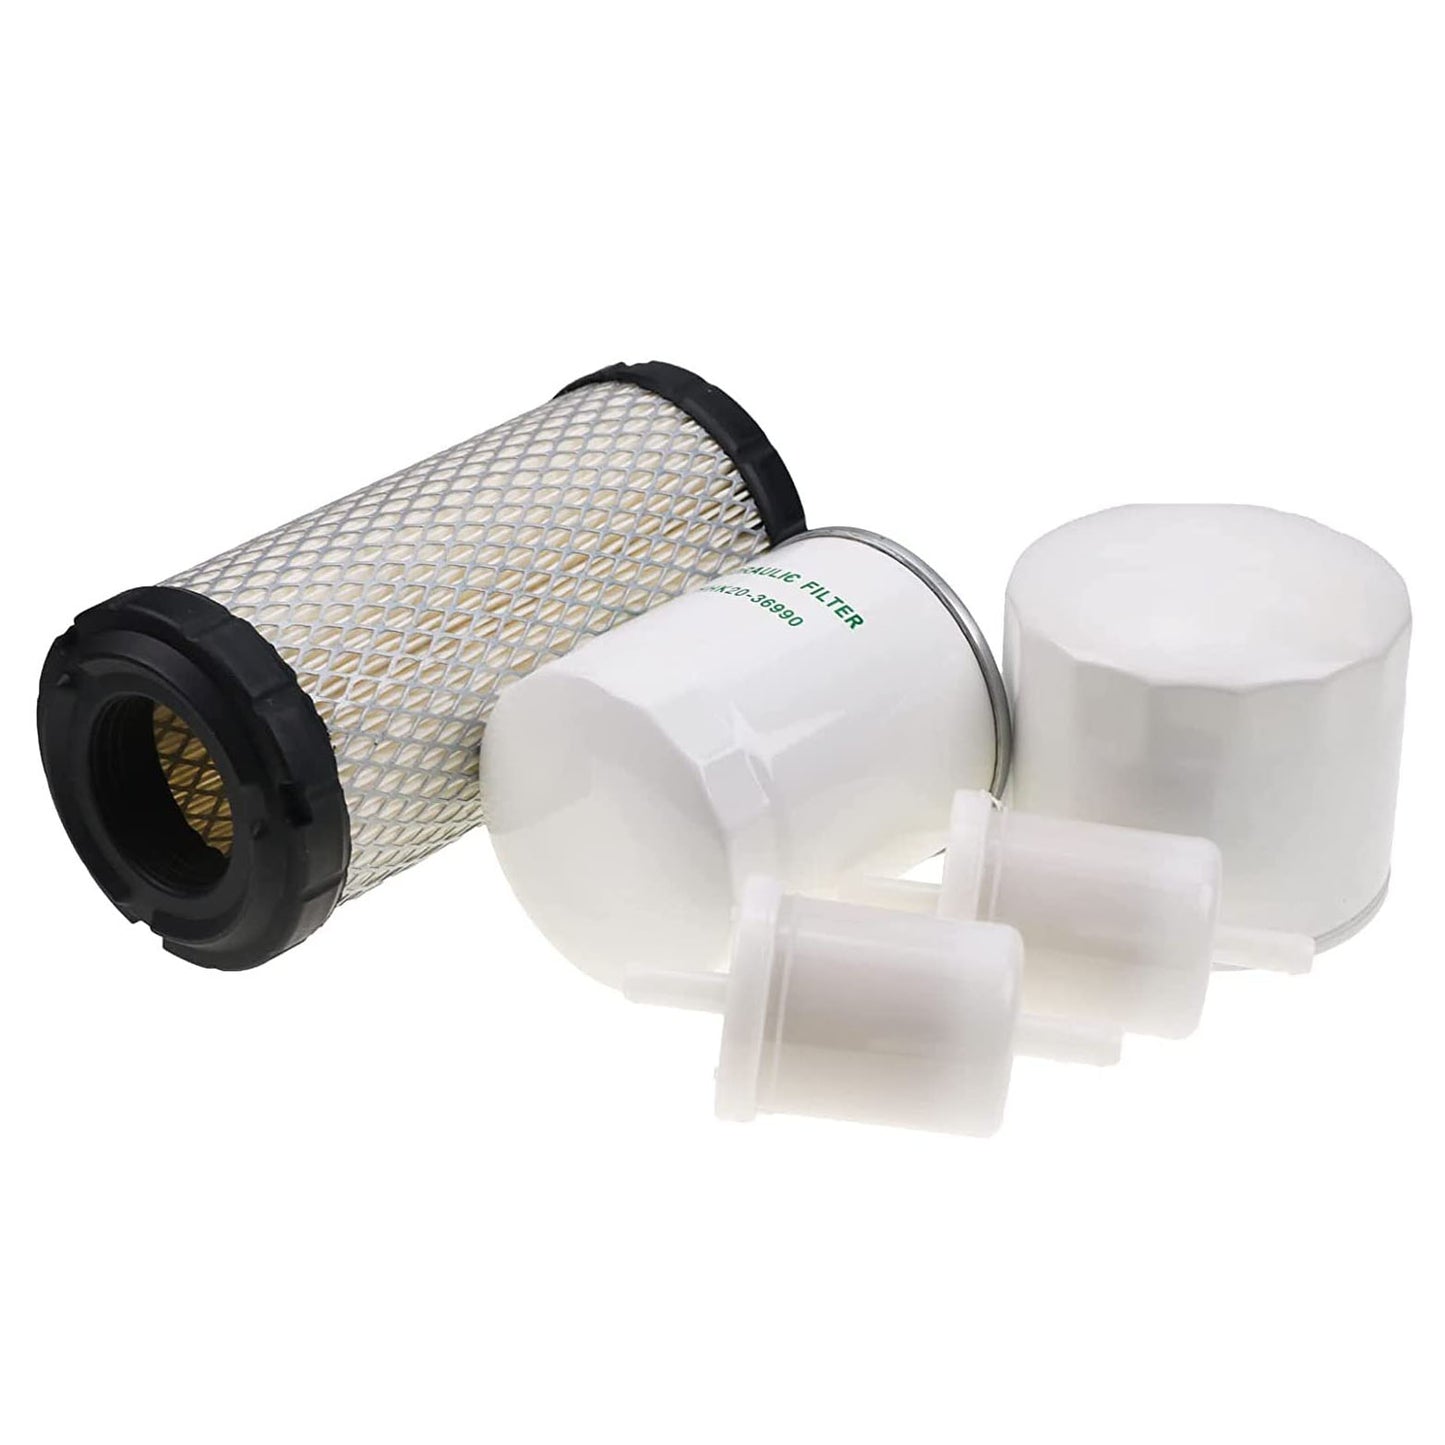 New Filter Kit Compatible with Kubota BX2200 BX2230 BX2350 BX2360 BX2370 BX2660 BX2670 BX22 BX23 BX24 BX25 BX25DLB ZD18 ZD21 ZD25 ZD28 GR2100 GR2110 GR2120